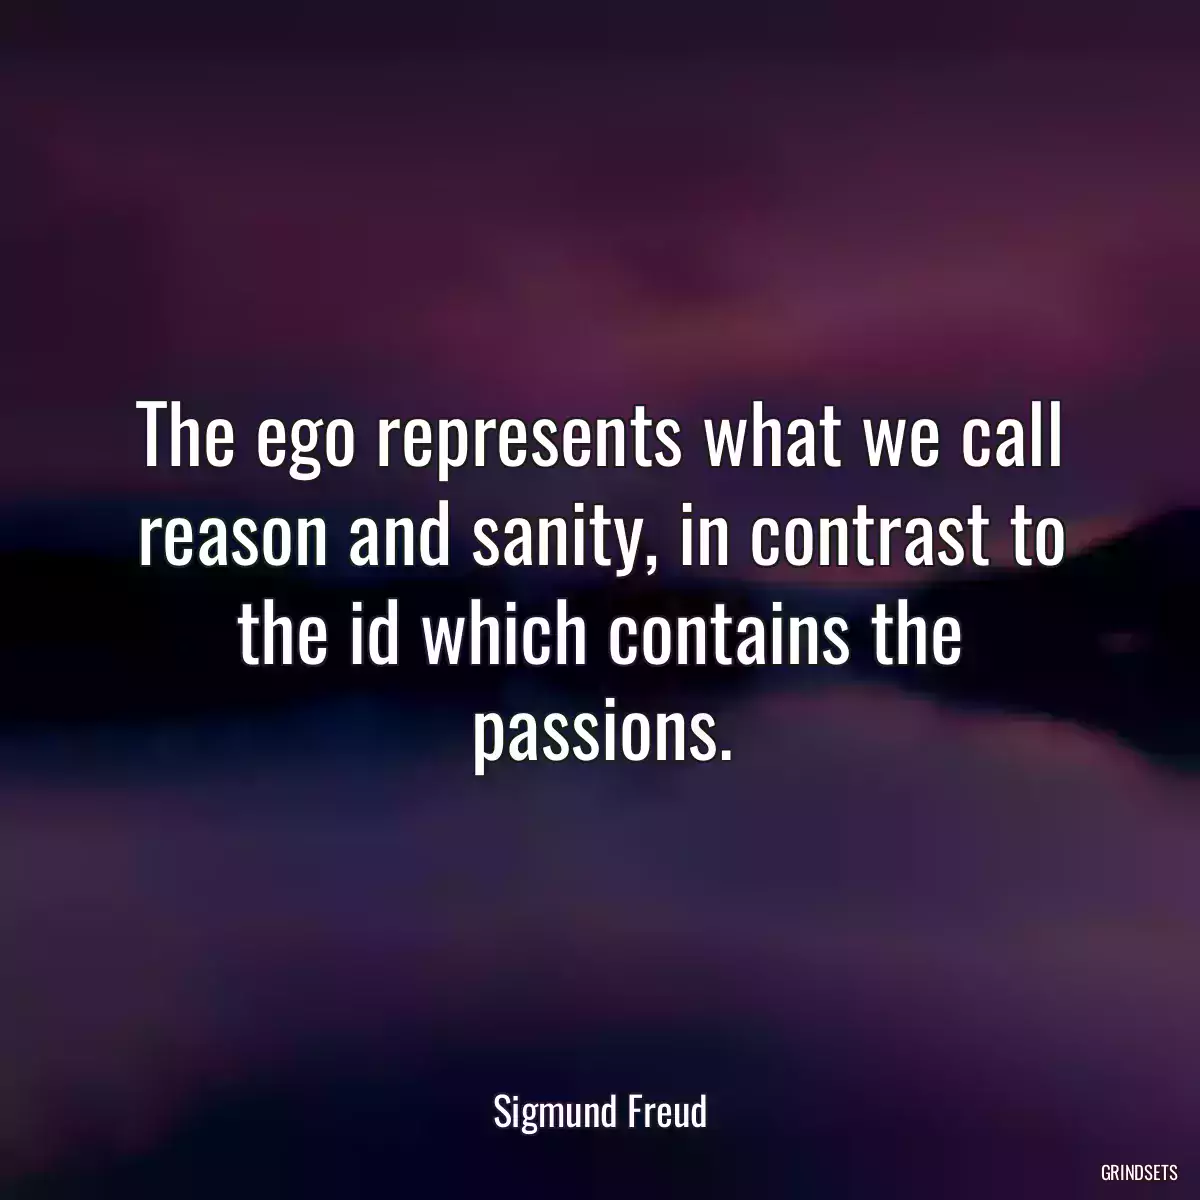 The ego represents what we call reason and sanity, in contrast to the id which contains the passions.